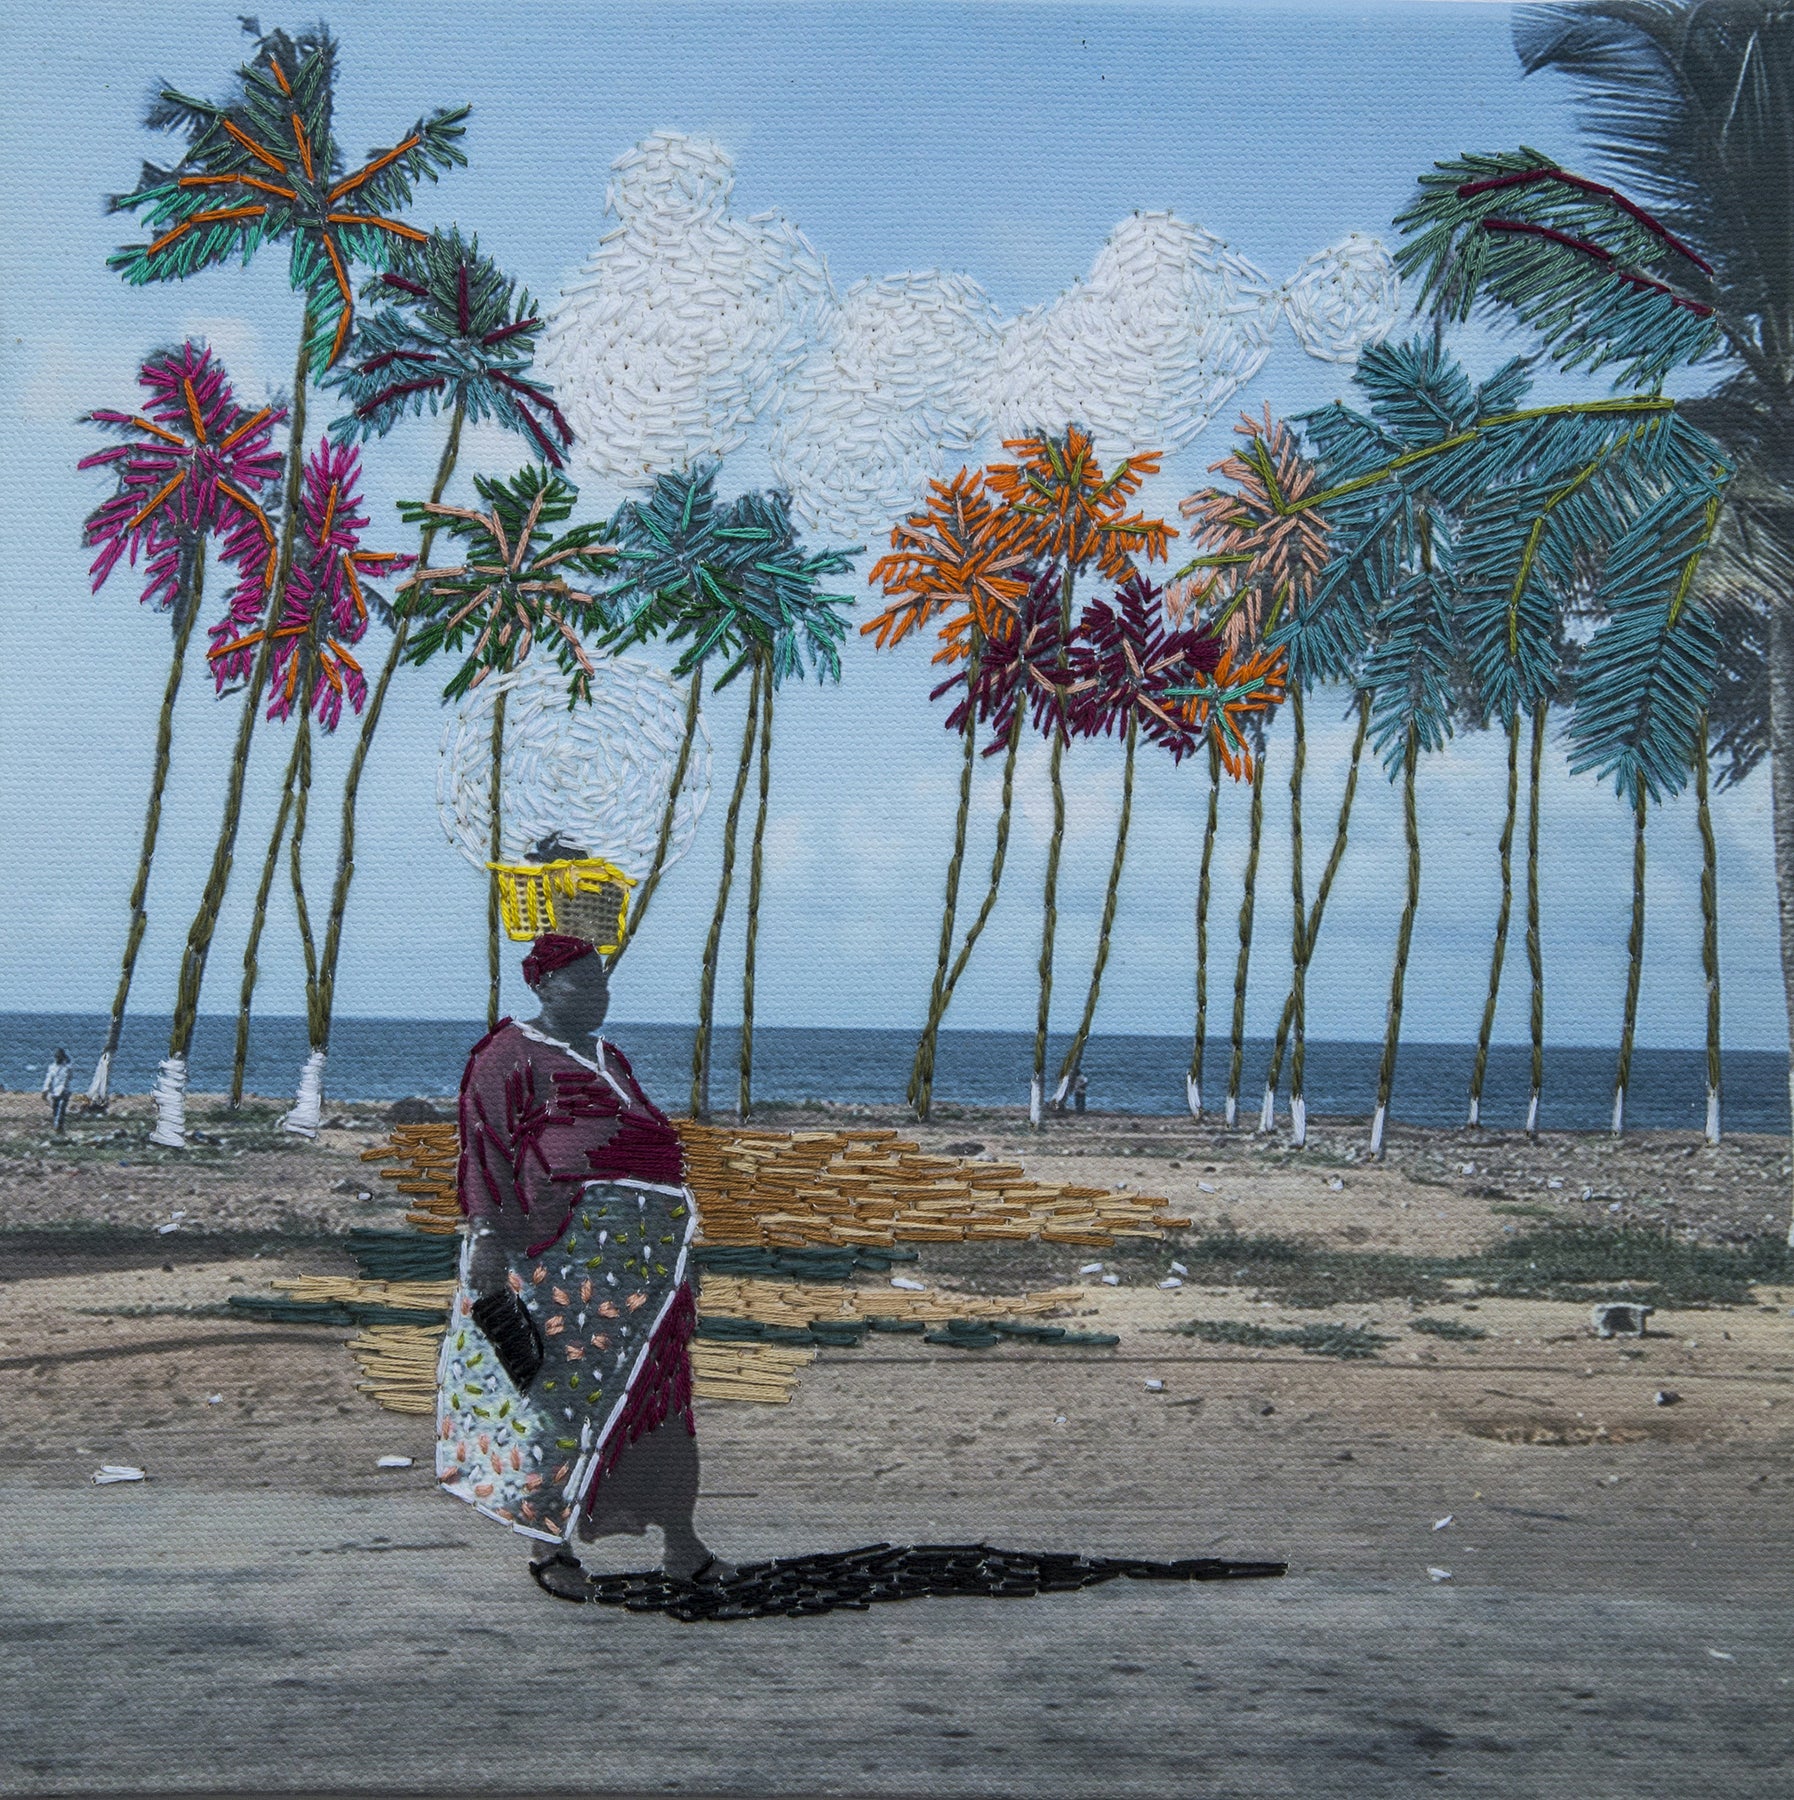 Embroidered photograph of woman walking by palm trees.